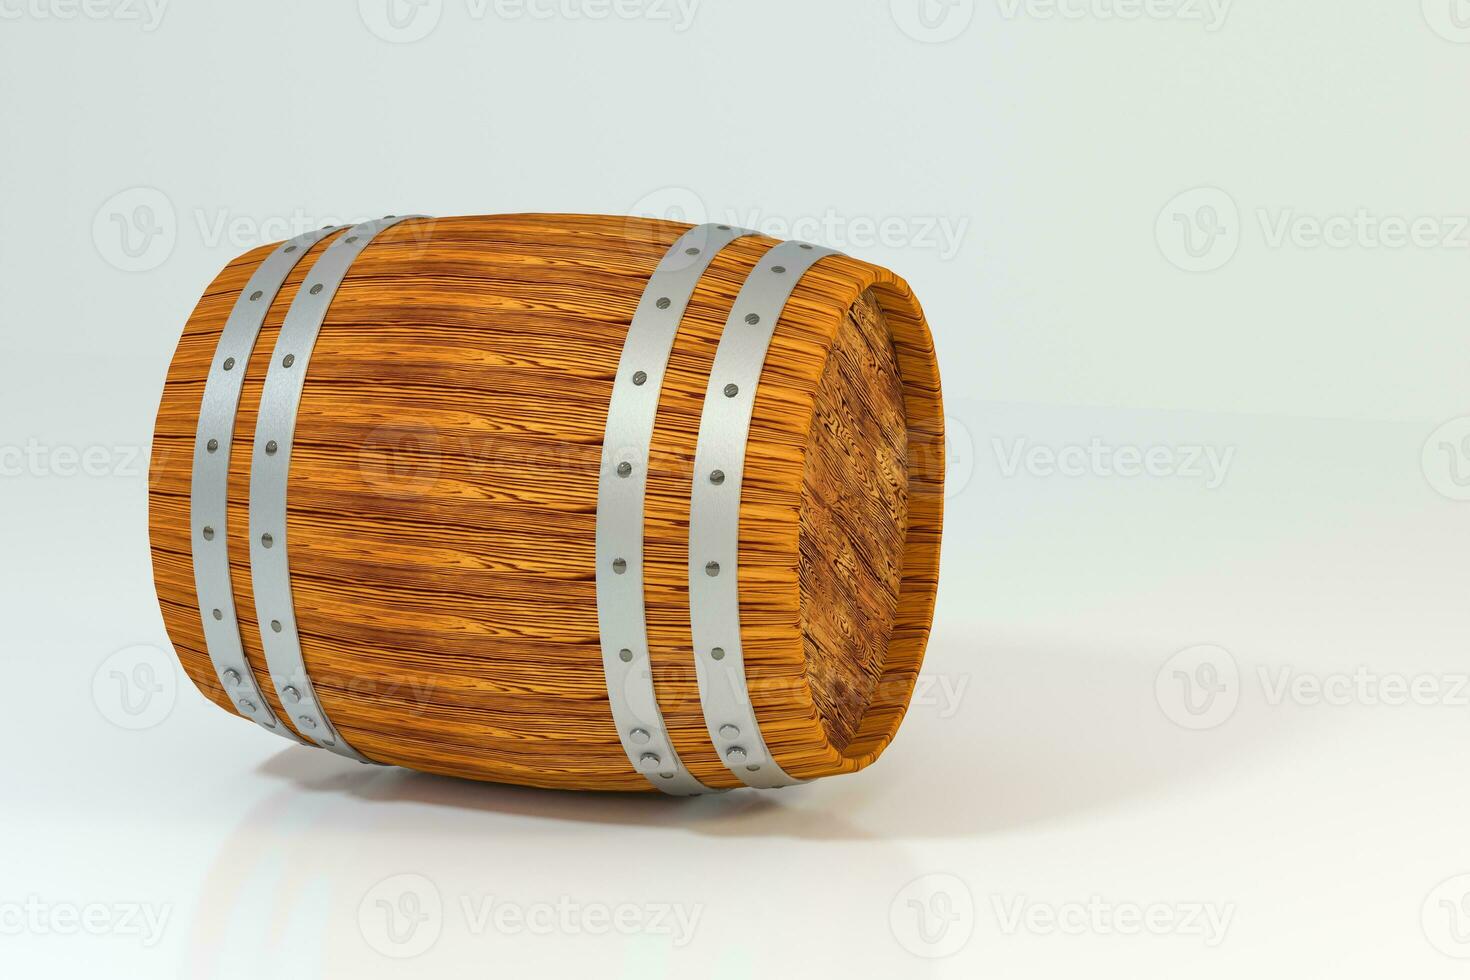 Wooden winery barrel with white background, 3d rendering photo